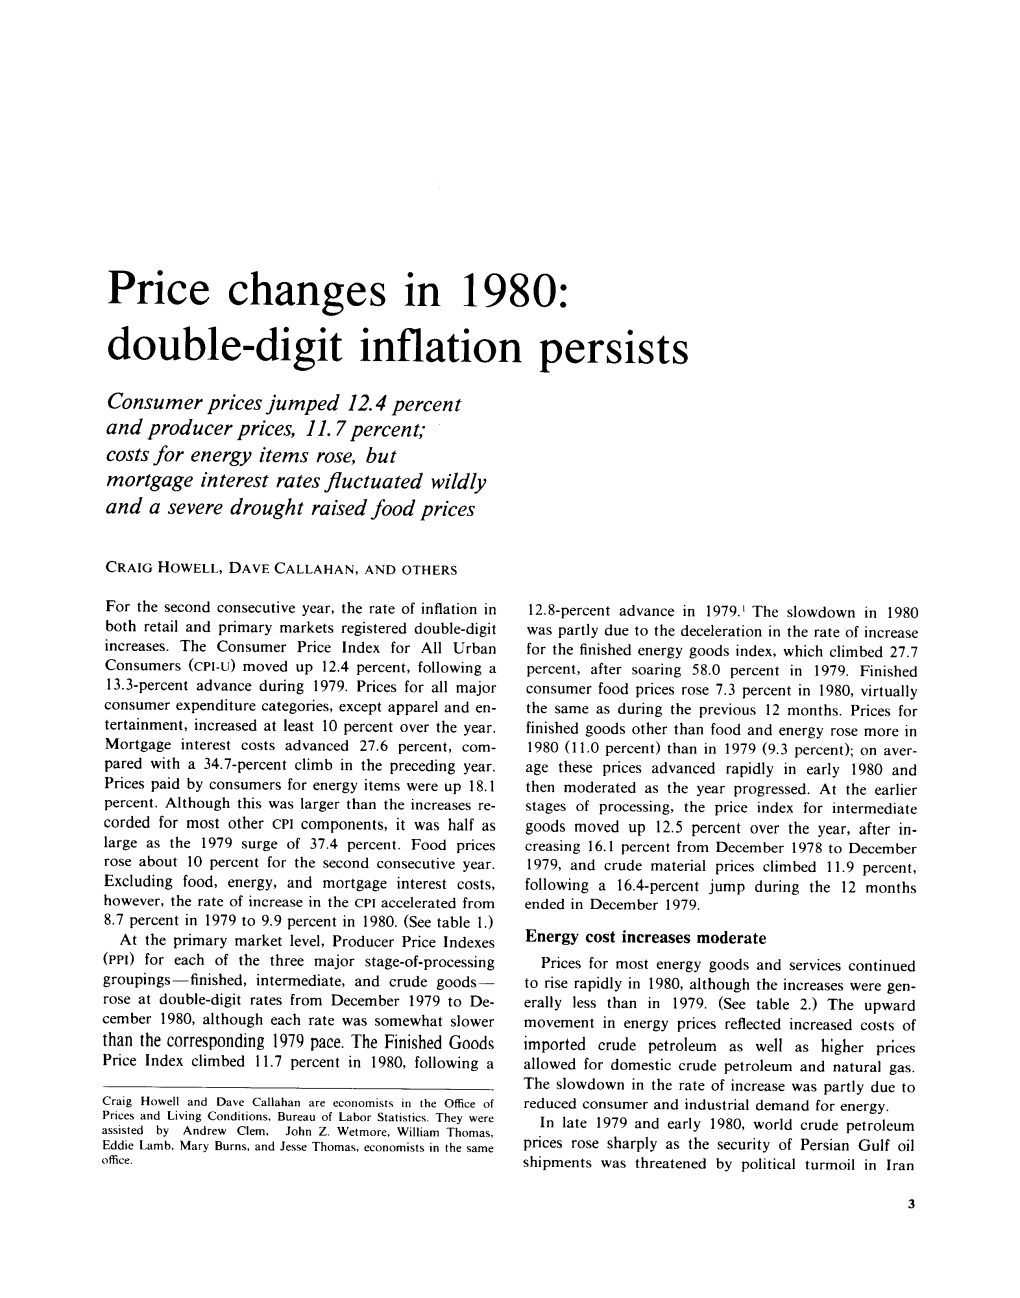 Price Changes in 1980: Double-Digit Inflation Persists Consumer Prices Jumped 12.4 Percent and Producer Prices, 11